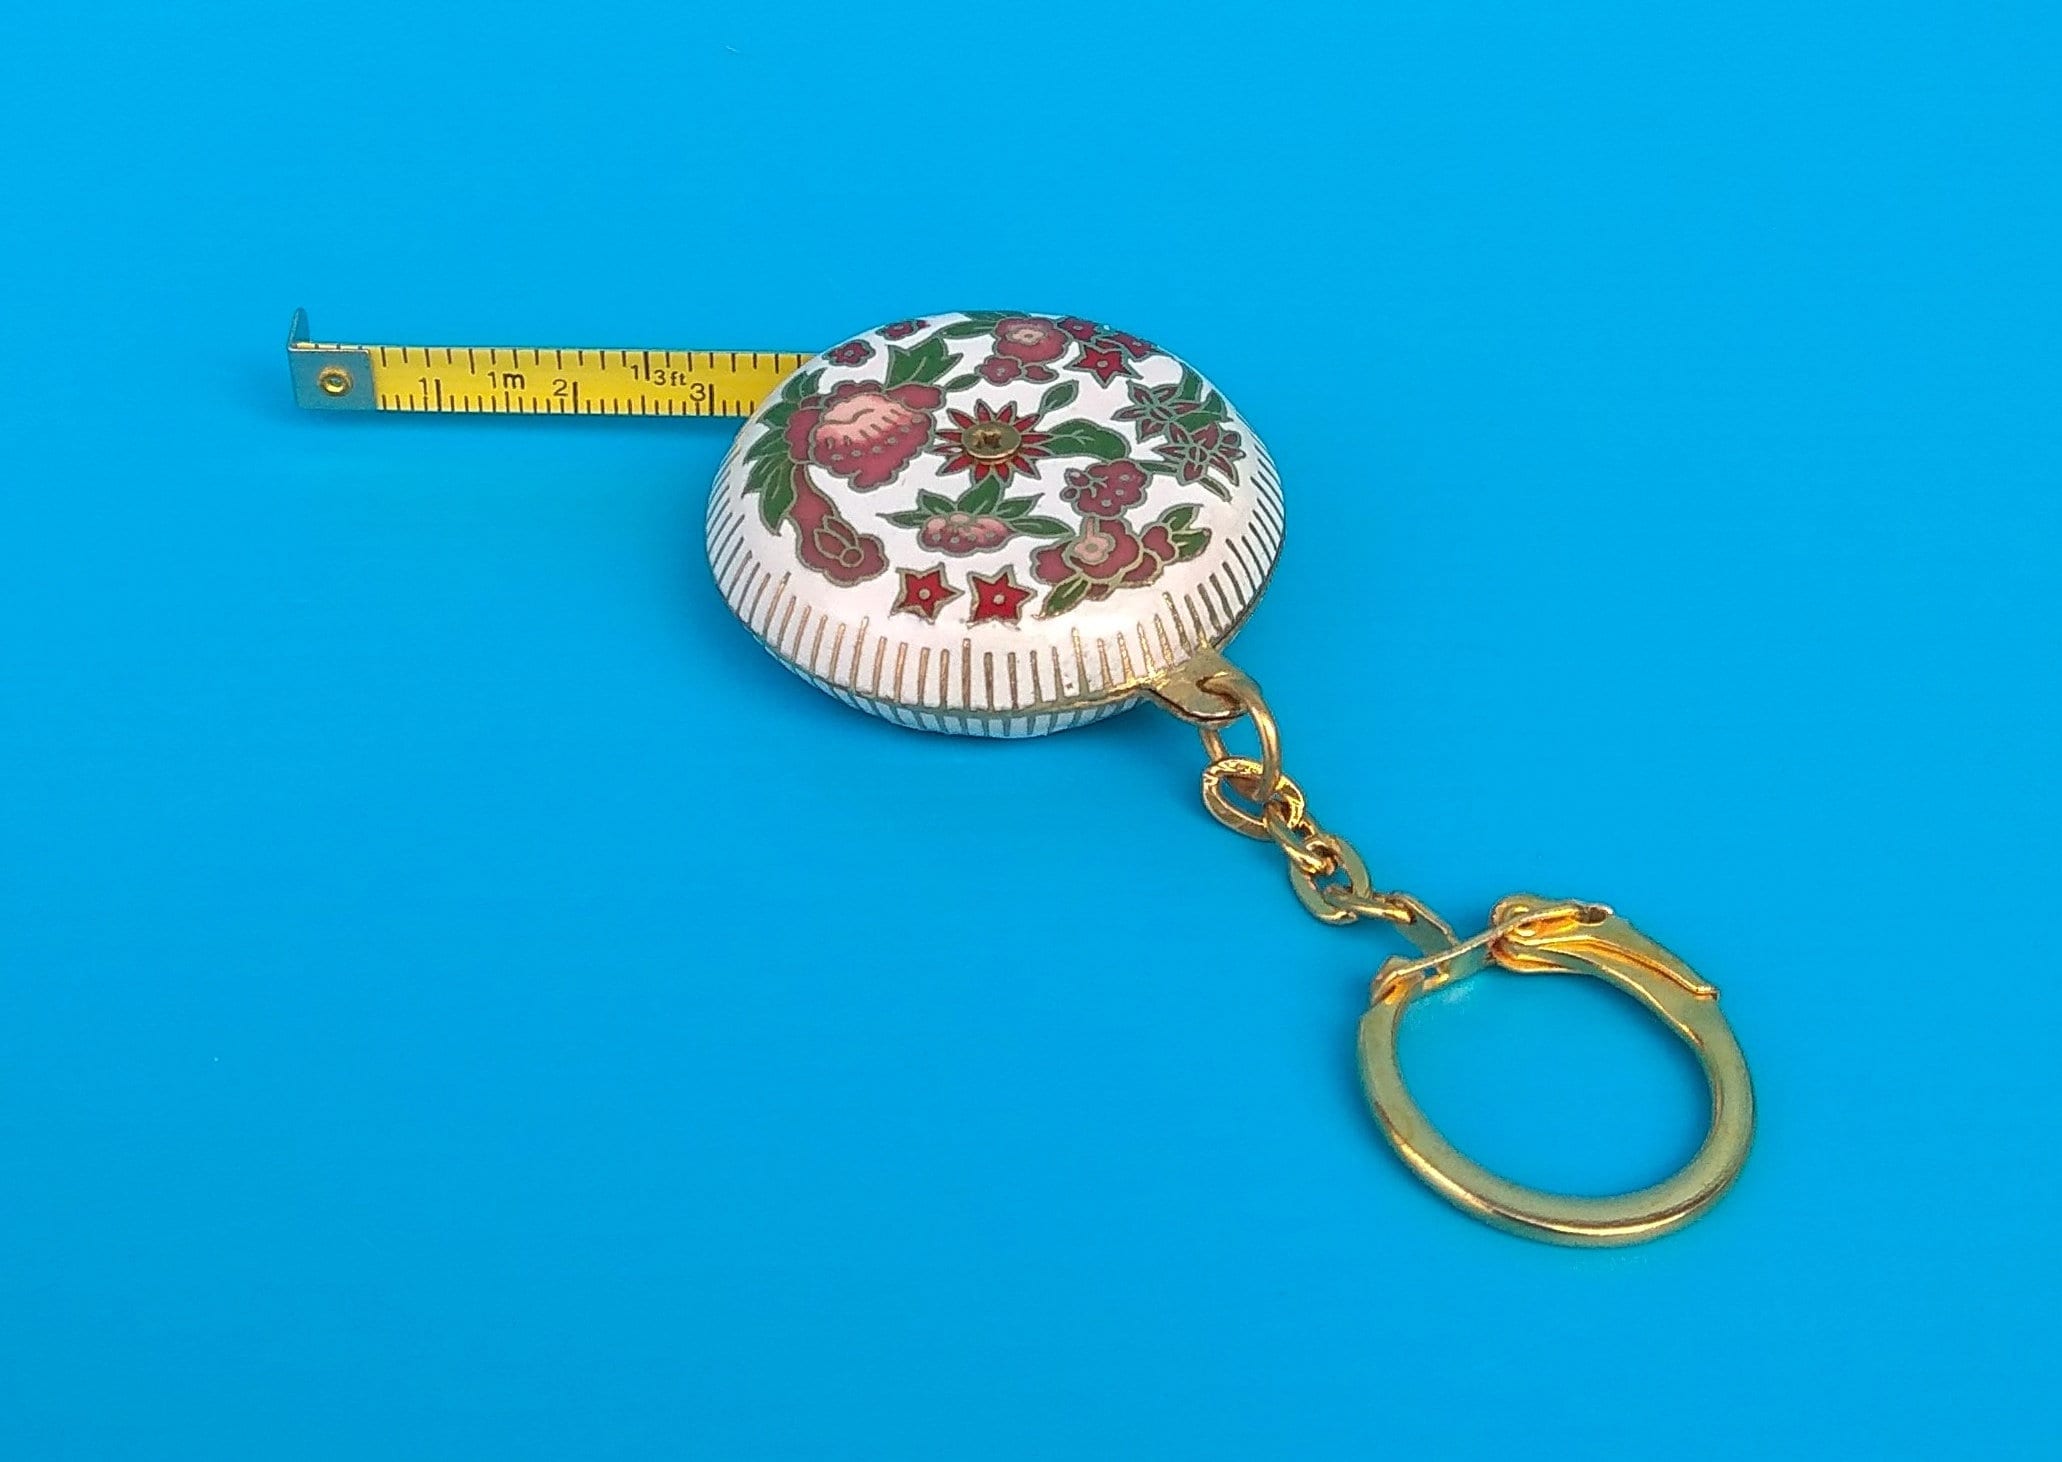 Personalized House Shape Tape Measure Keychains - Tape Measures Keychains